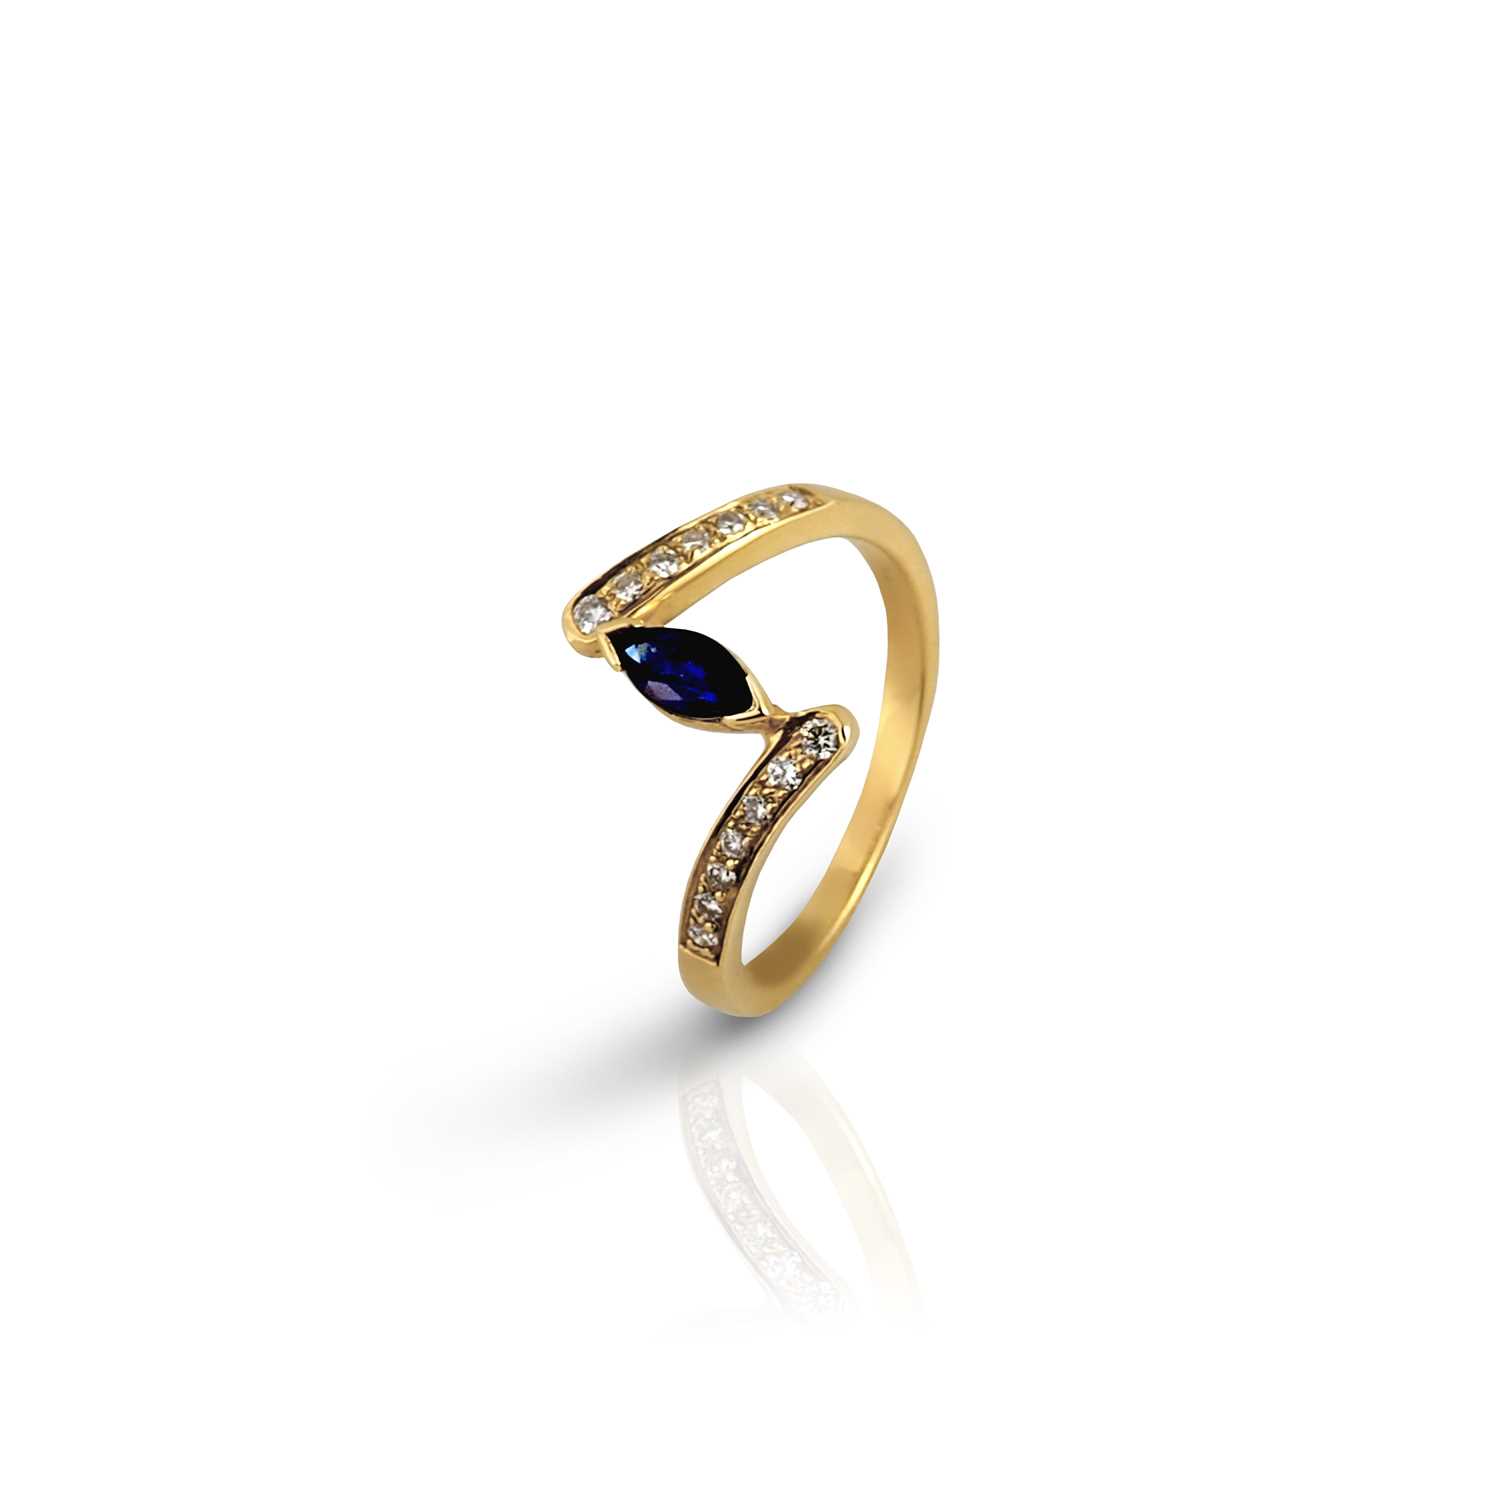 Lot 94 - 18K Gold, Diamond and Sapphire Ring